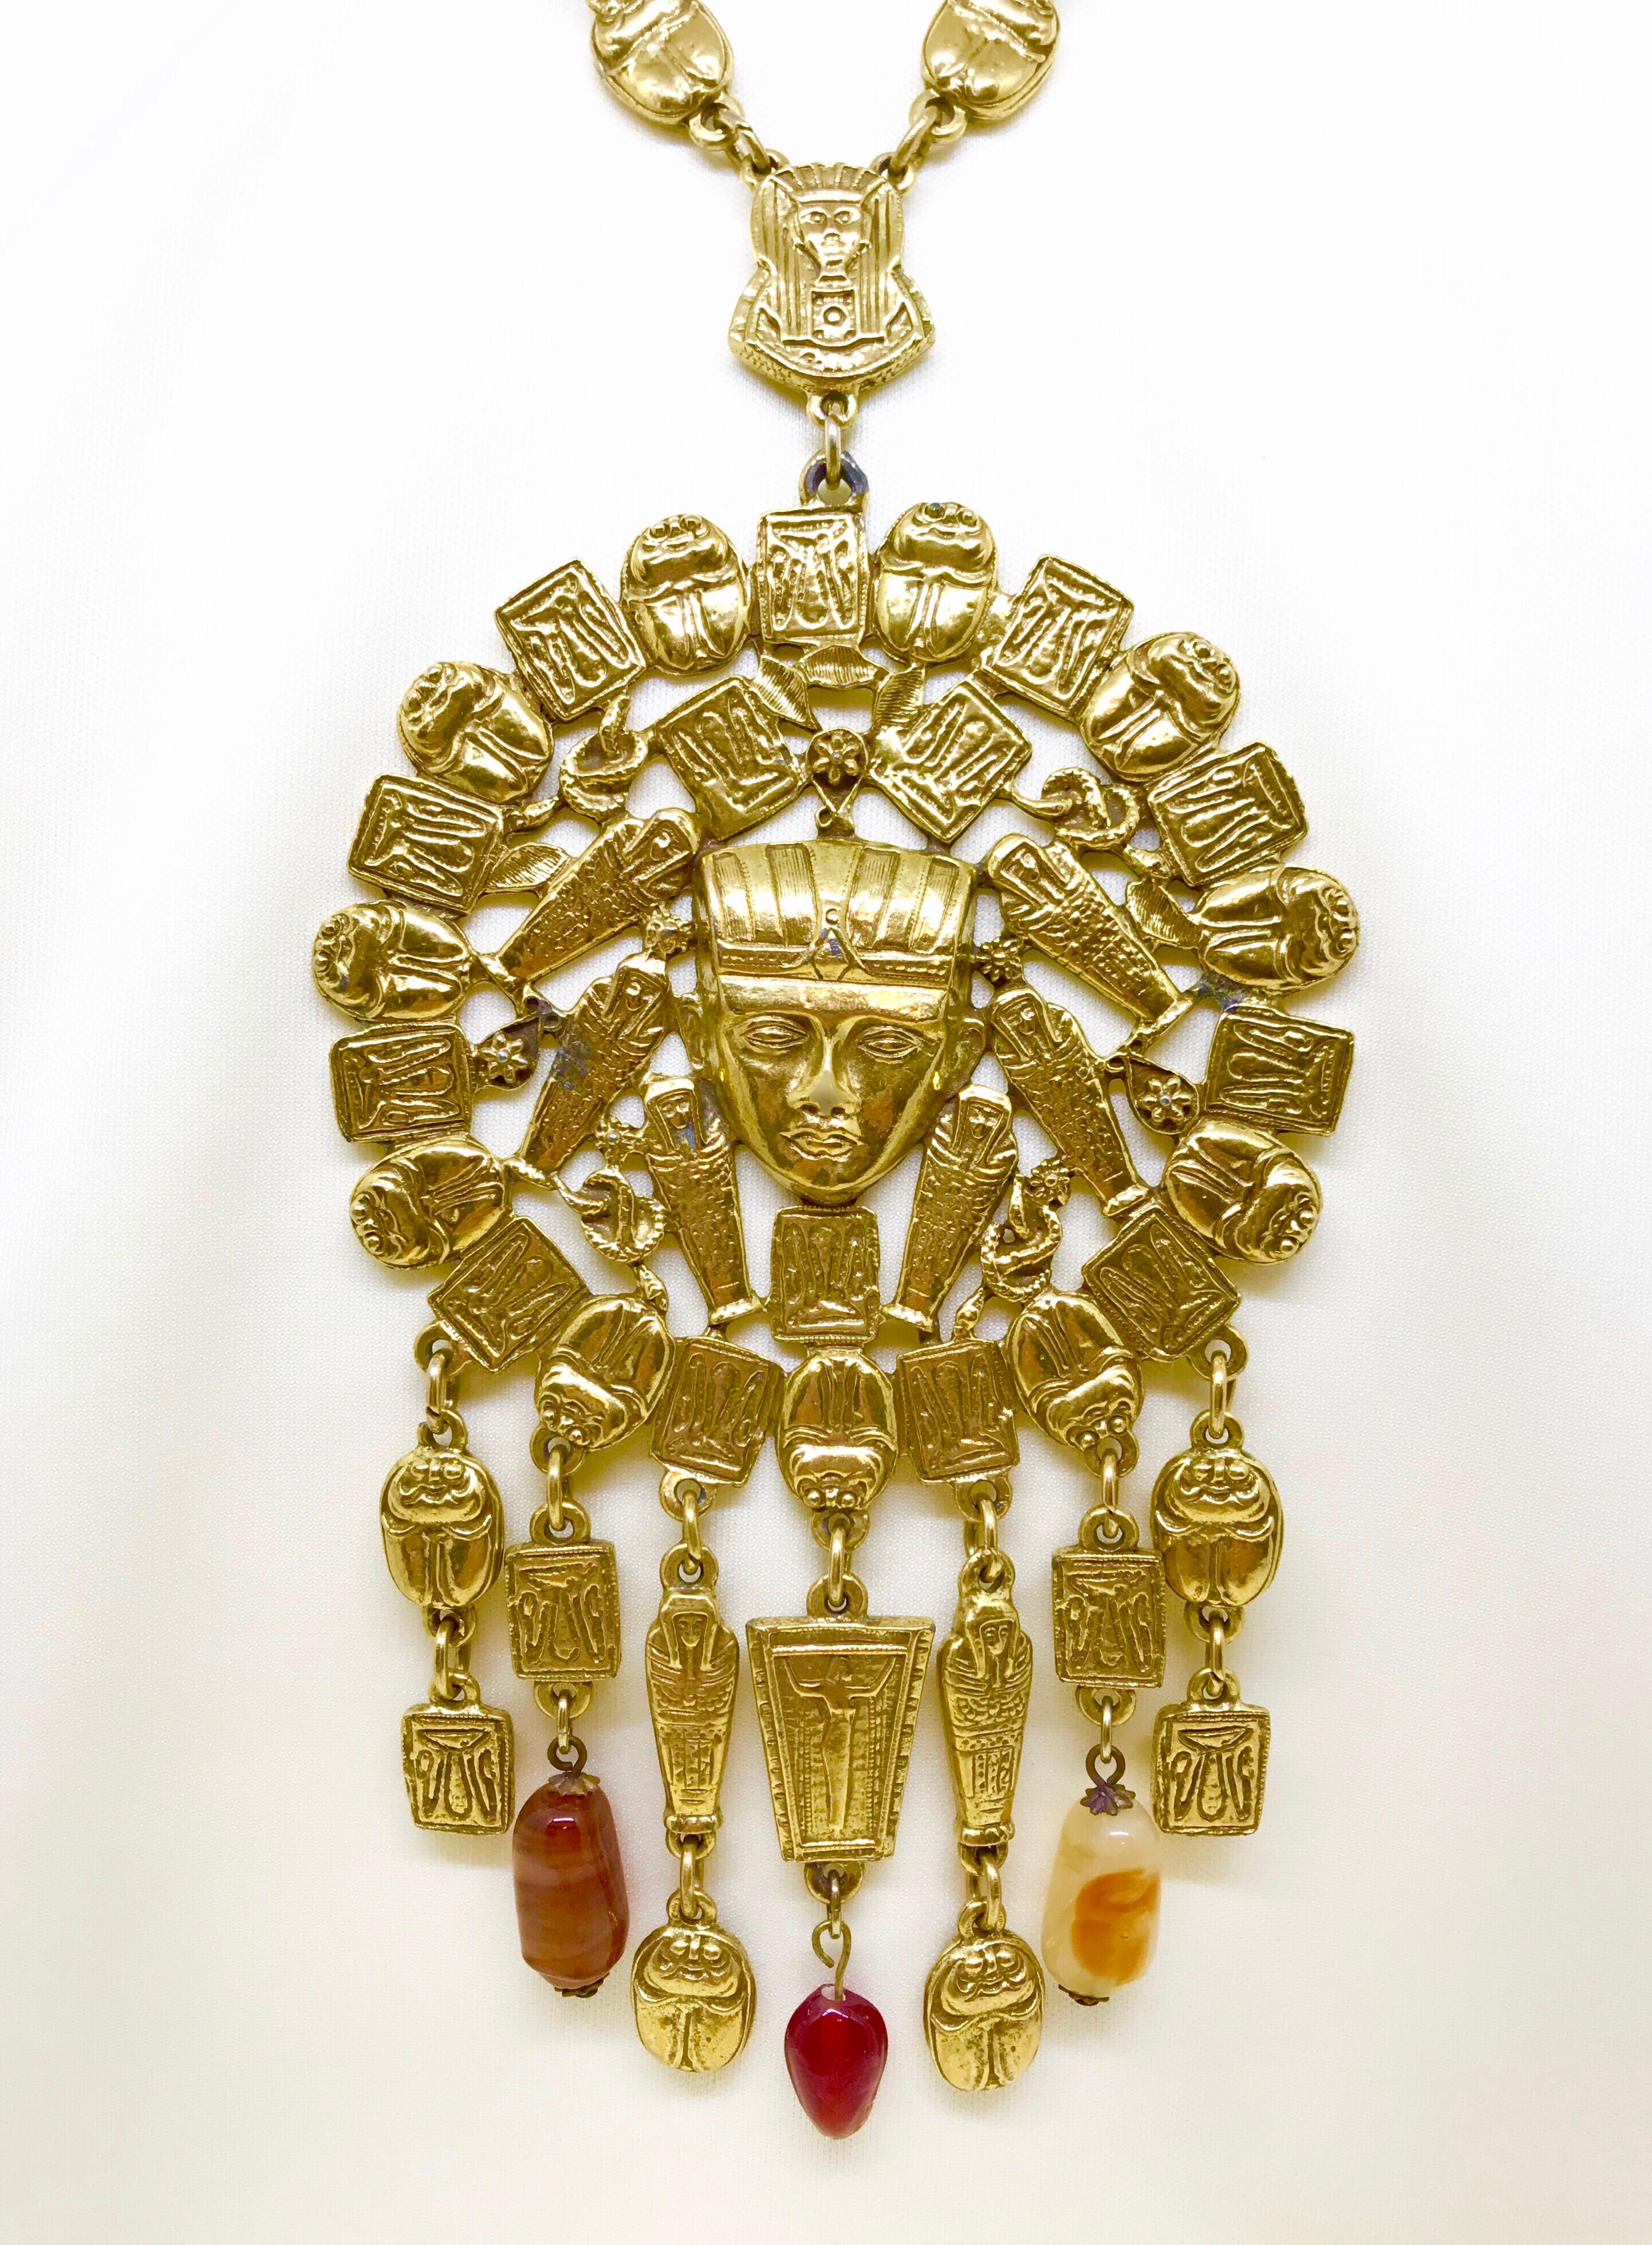 Circa 1960s Goldette Large Goldtone Egyptian Revival Necklace  In Good Condition For Sale In Long Beach, CA